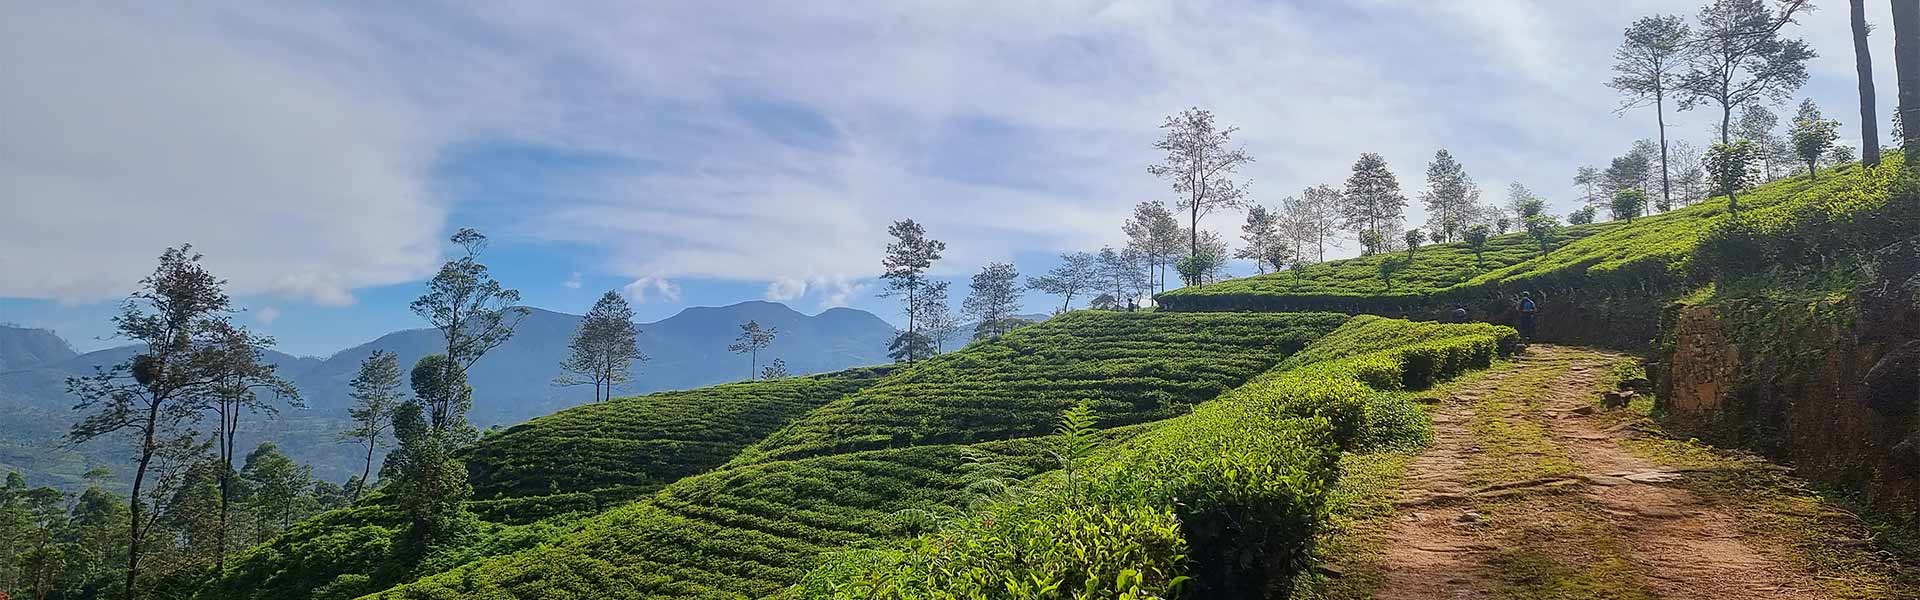 A tea estate along the Pekoe Trail in the central highlands of Sri Lanka